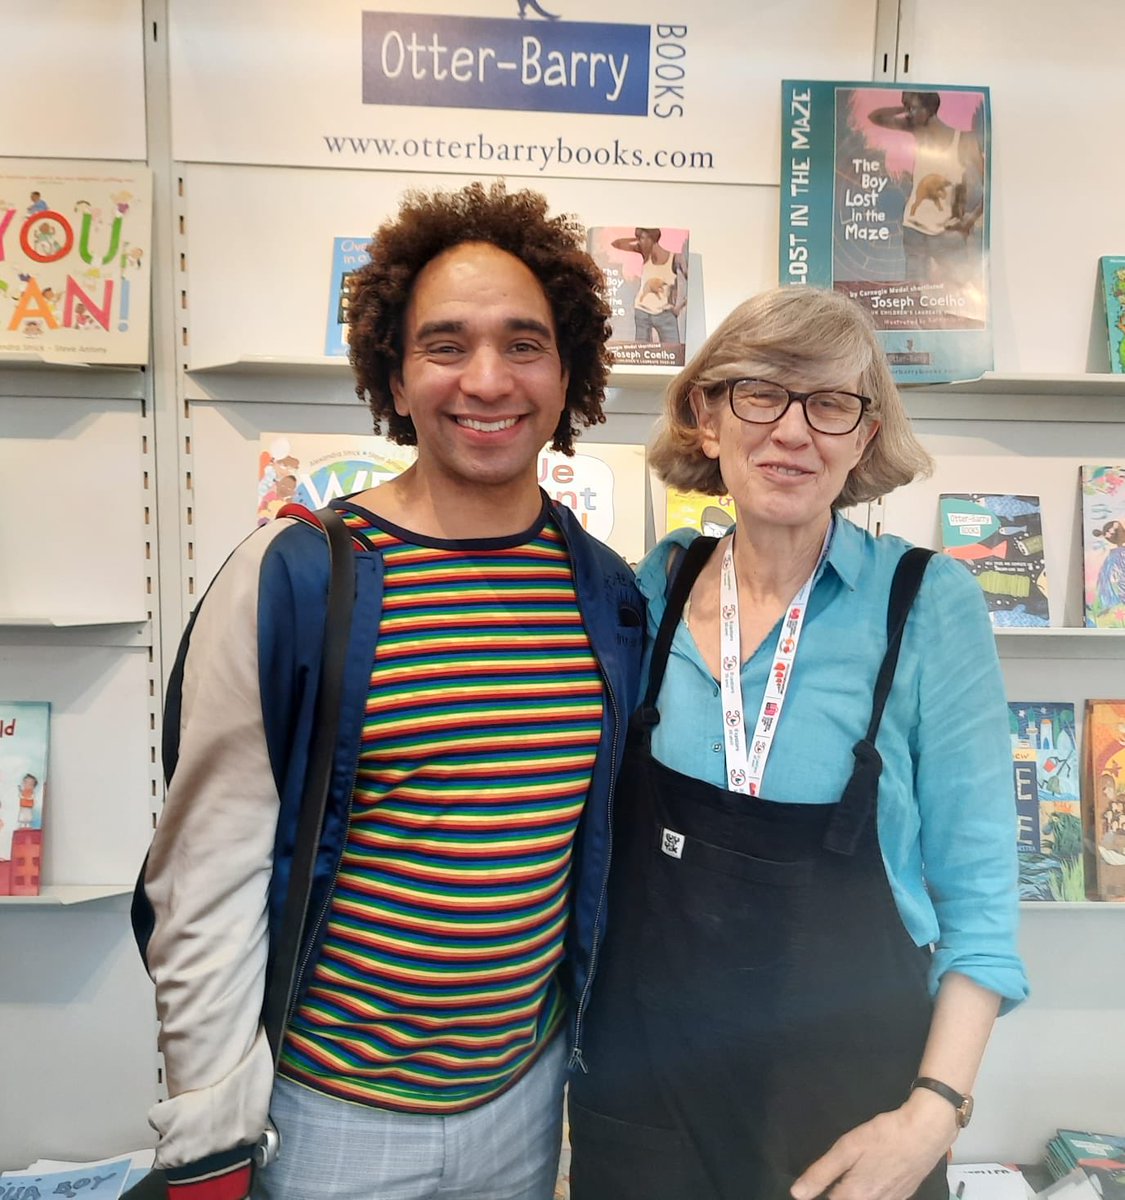 ⁦@JosephACoelho⁩ ⁦@UKLaureate⁩ on the ⁦@OtterBarryBooks⁩ stand ⁦@BolognaBookFair⁩. ⁦@Candlewick⁩ confirmed as US publisher for TheBoyLostInTheMaze! Hooray.